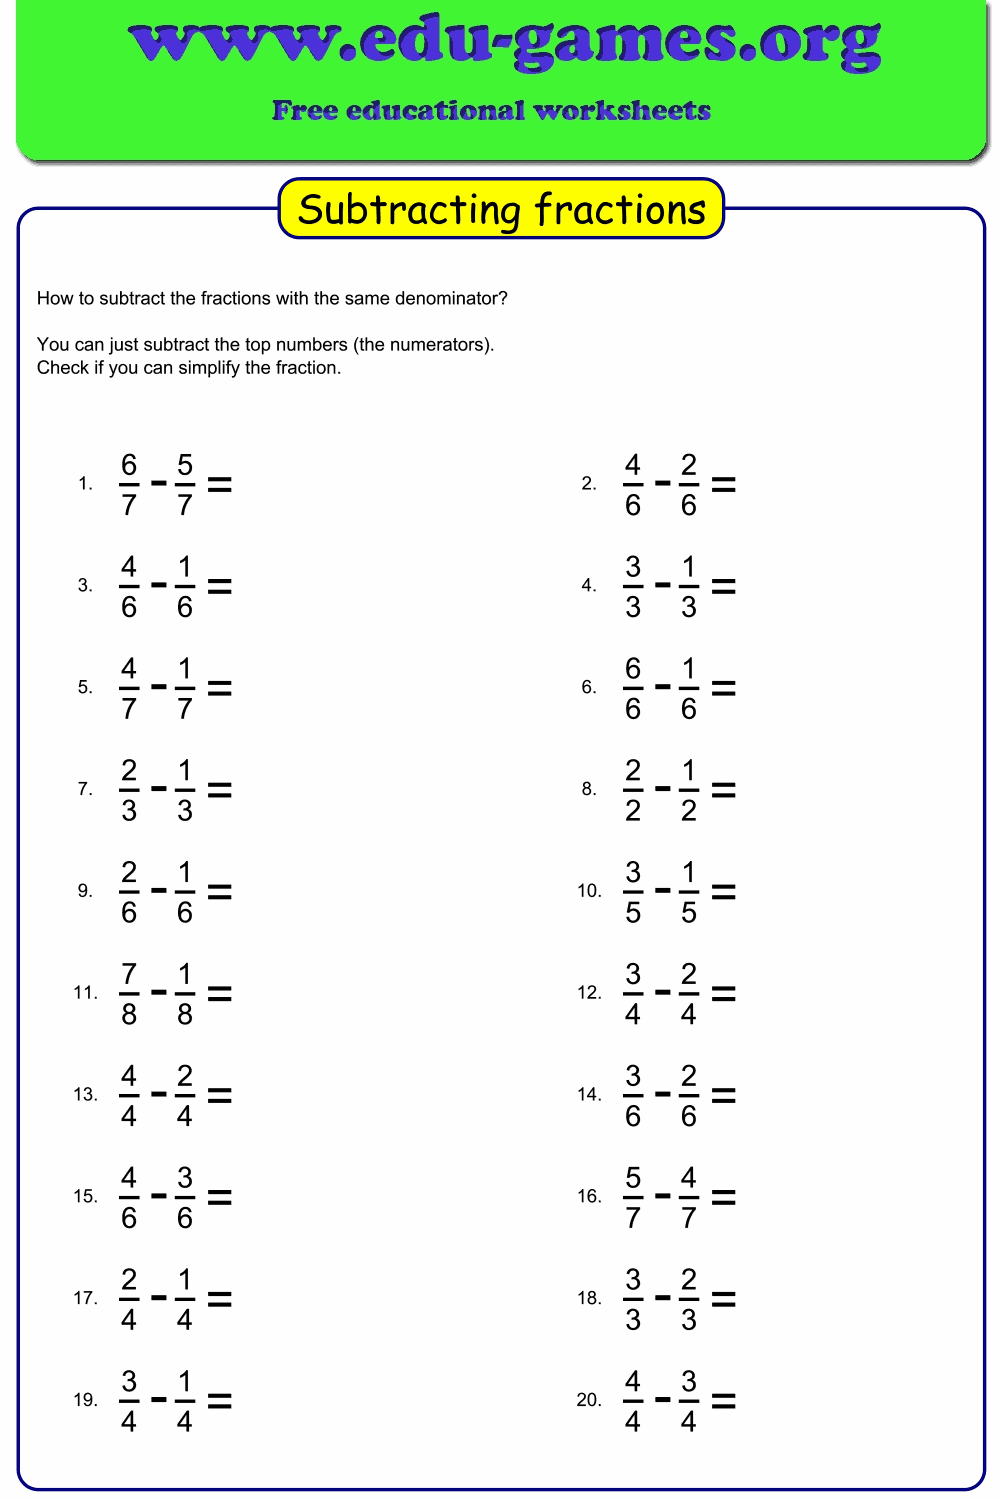 subtracting-fractions-with-unlike-denominators-worksheet-answers